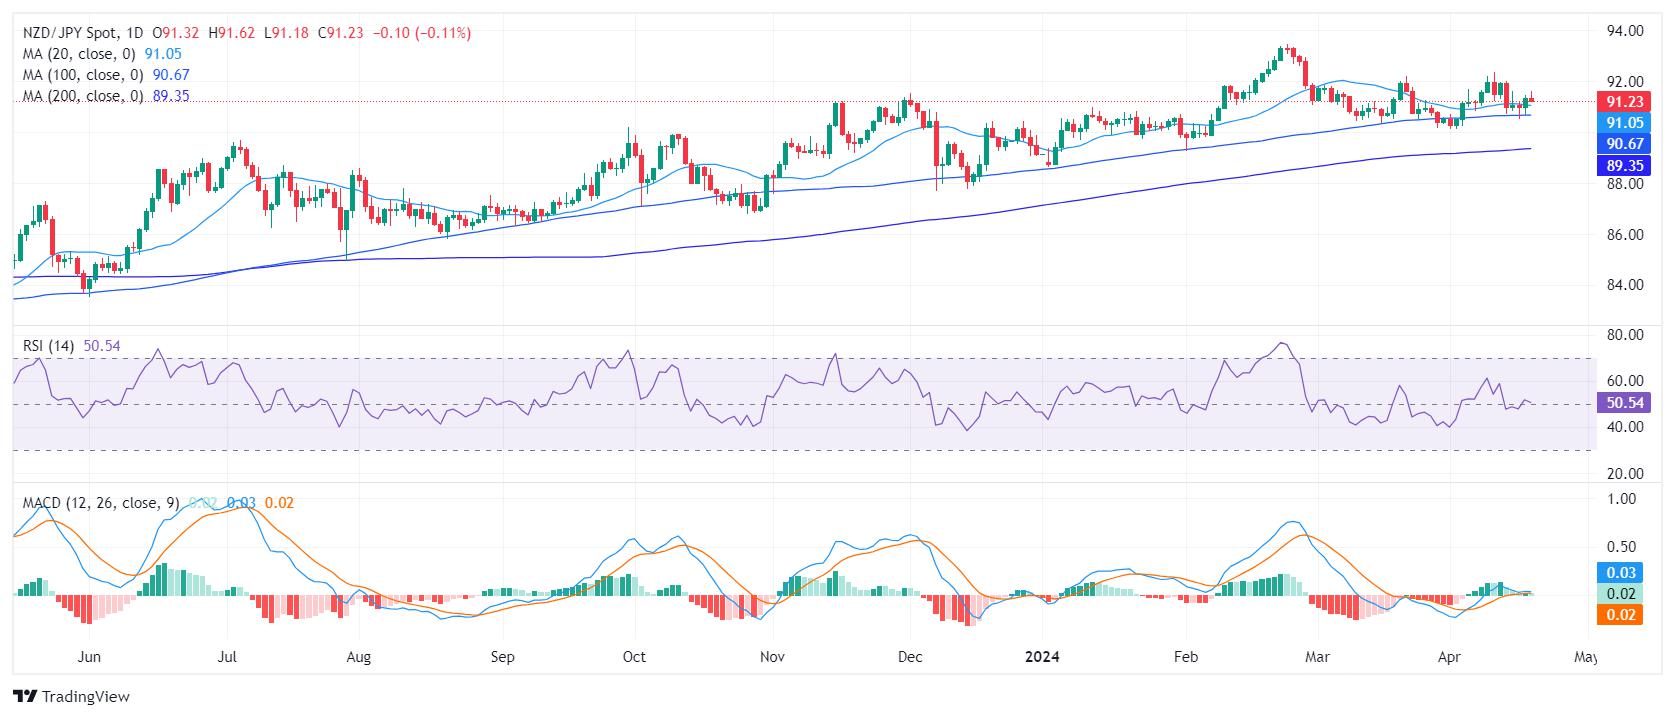 NZD/JPY Price Analysis: Buyers dominance diminishes, market could favor sellers soon